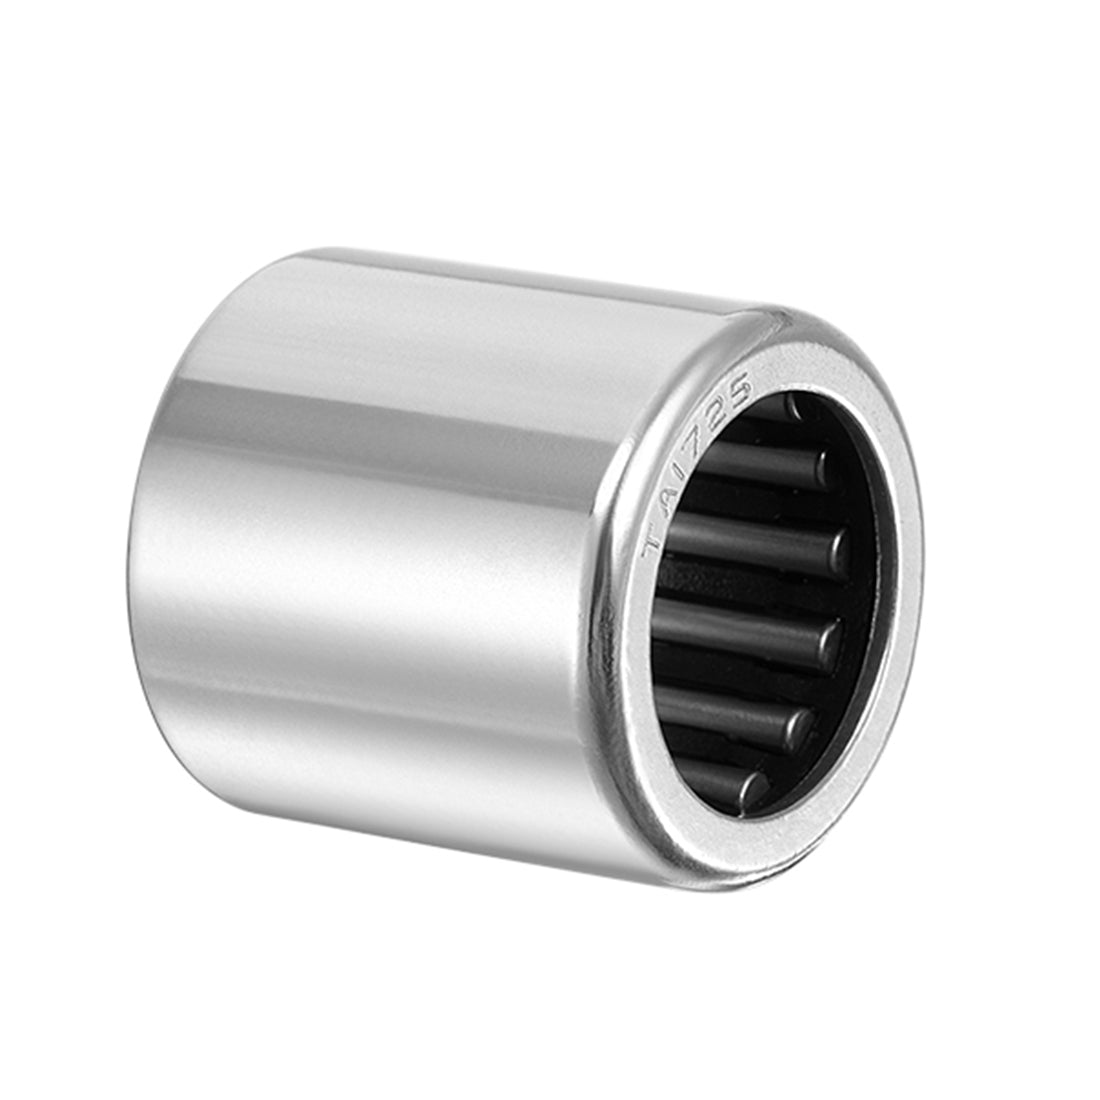 uxcell Uxcell TA1725 Needle Roller Bearings, Drawn Cup Open End, 17mm Bore 24mm OD 25mm Width 5pcs